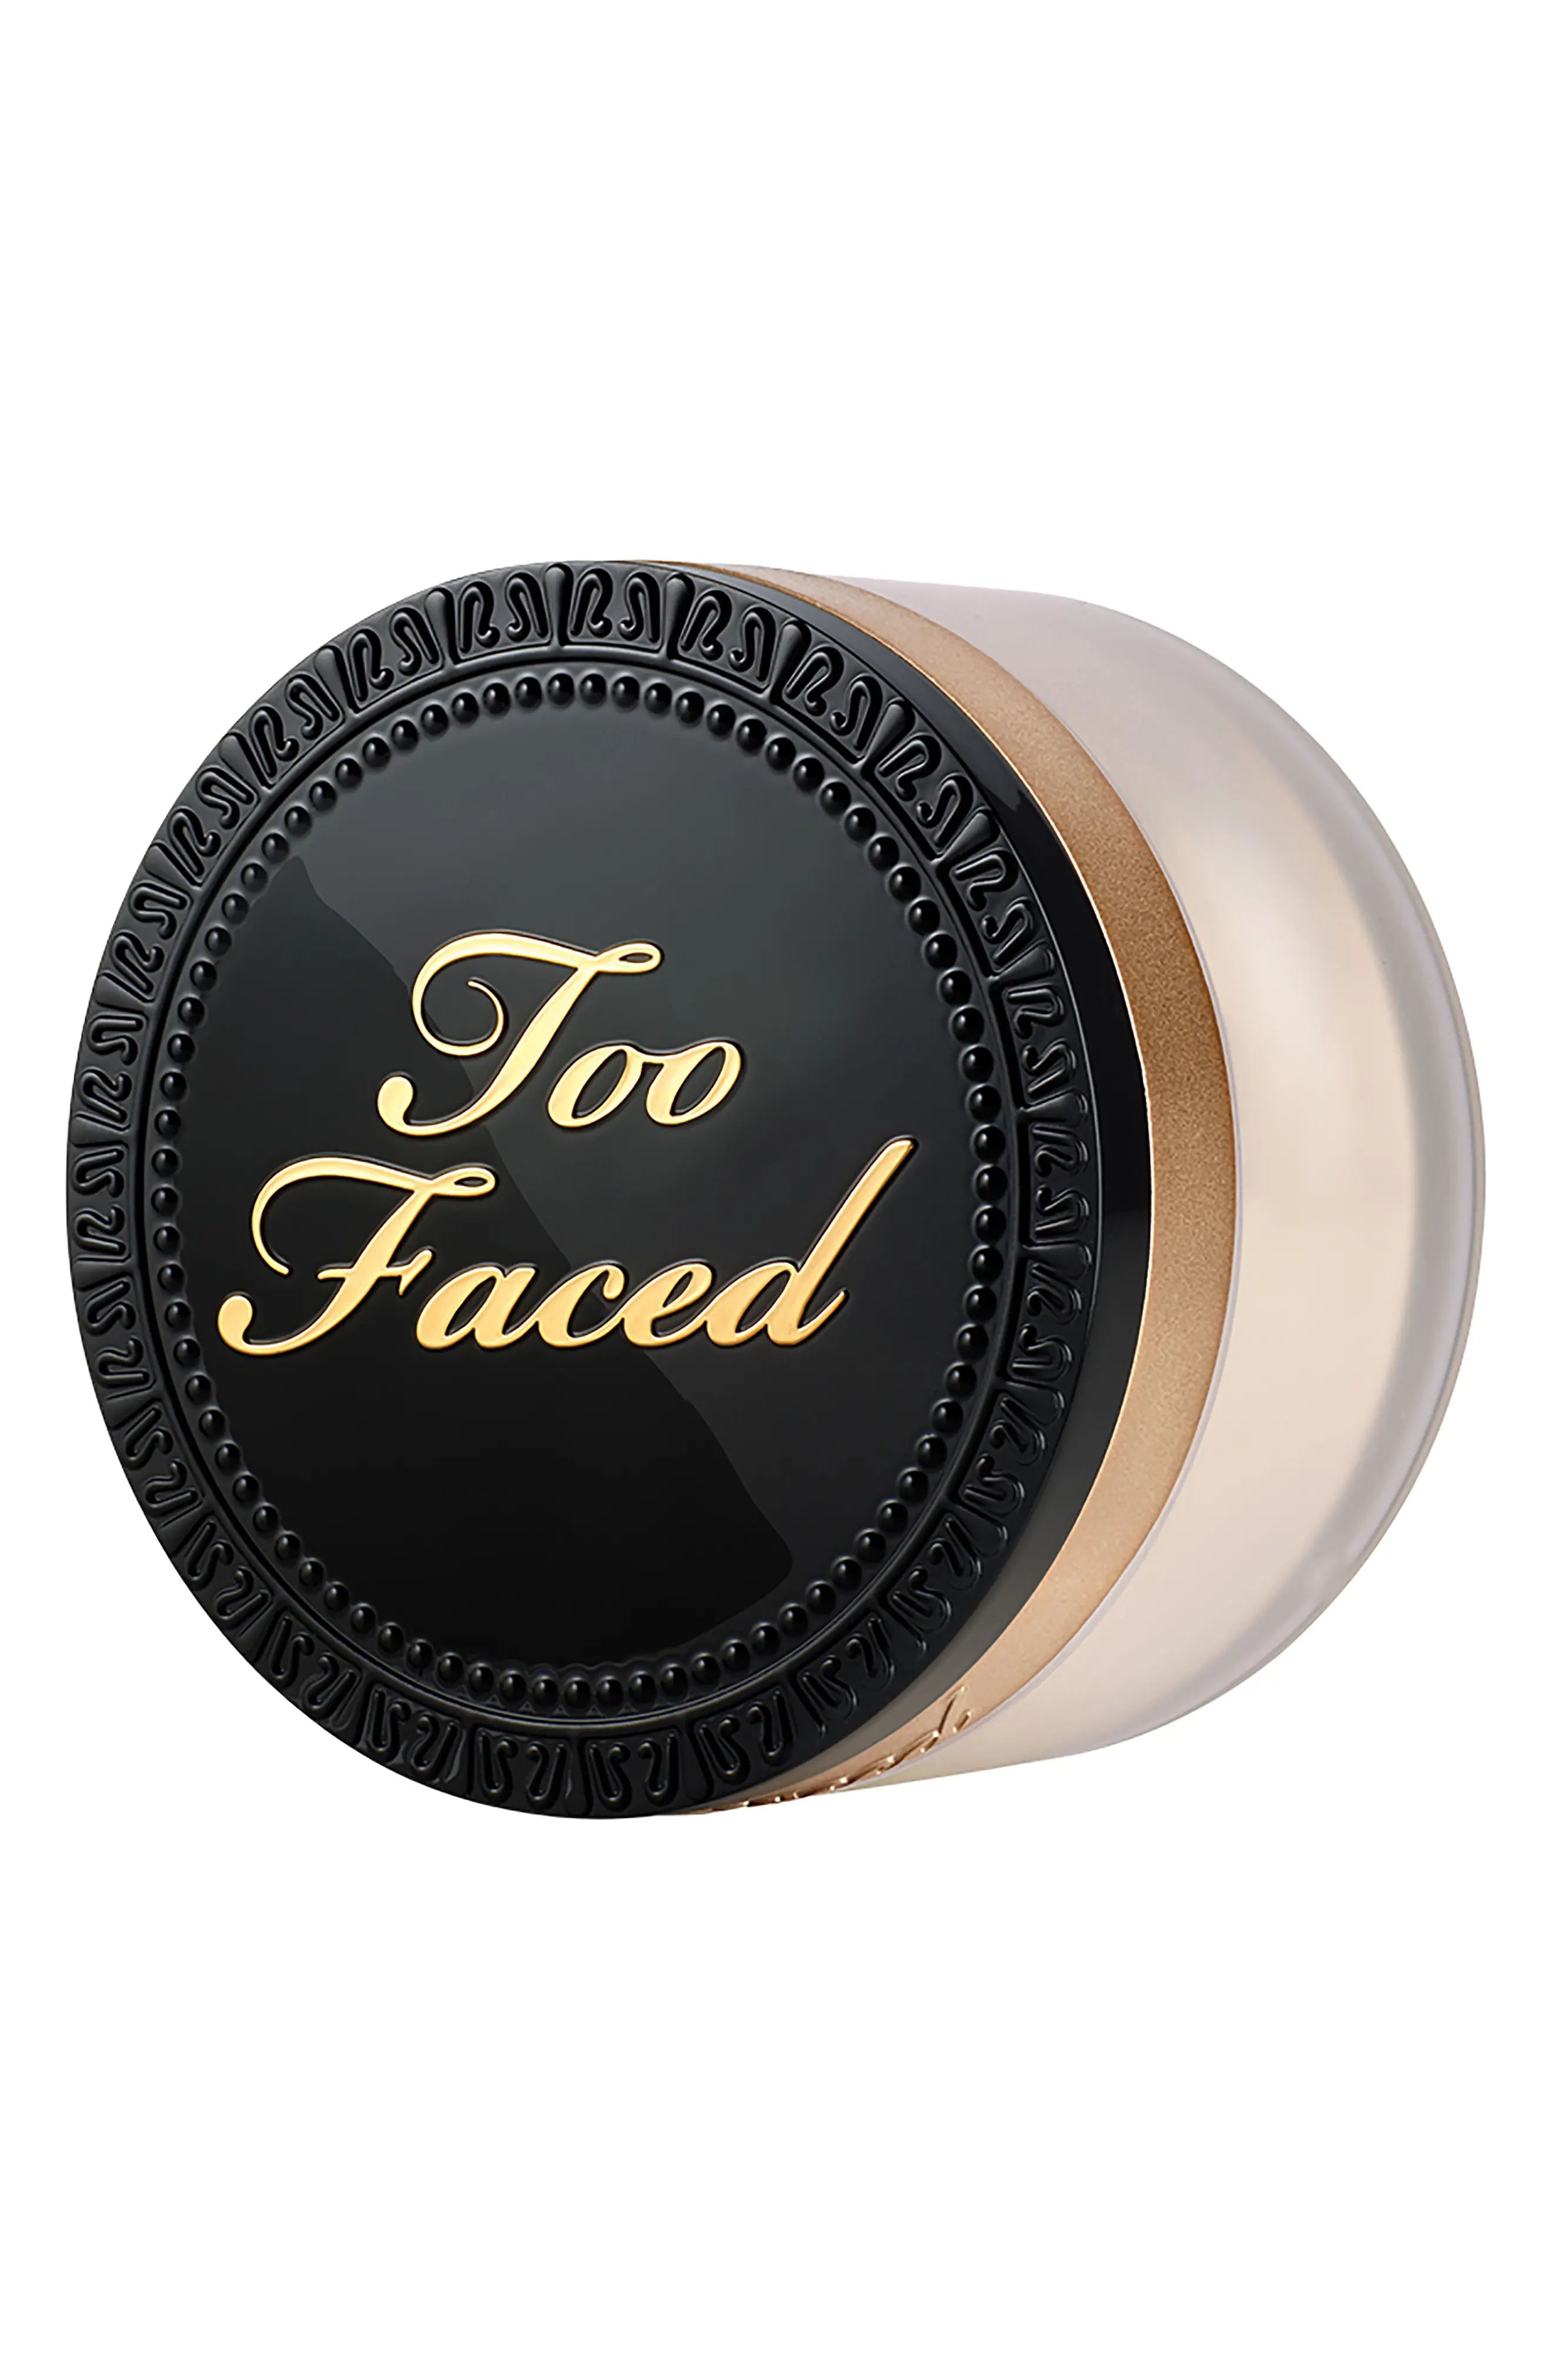 Too Faced Born This Way Ethereal Setting Powder, Size 0.05 oz - Translucent | Nordstrom